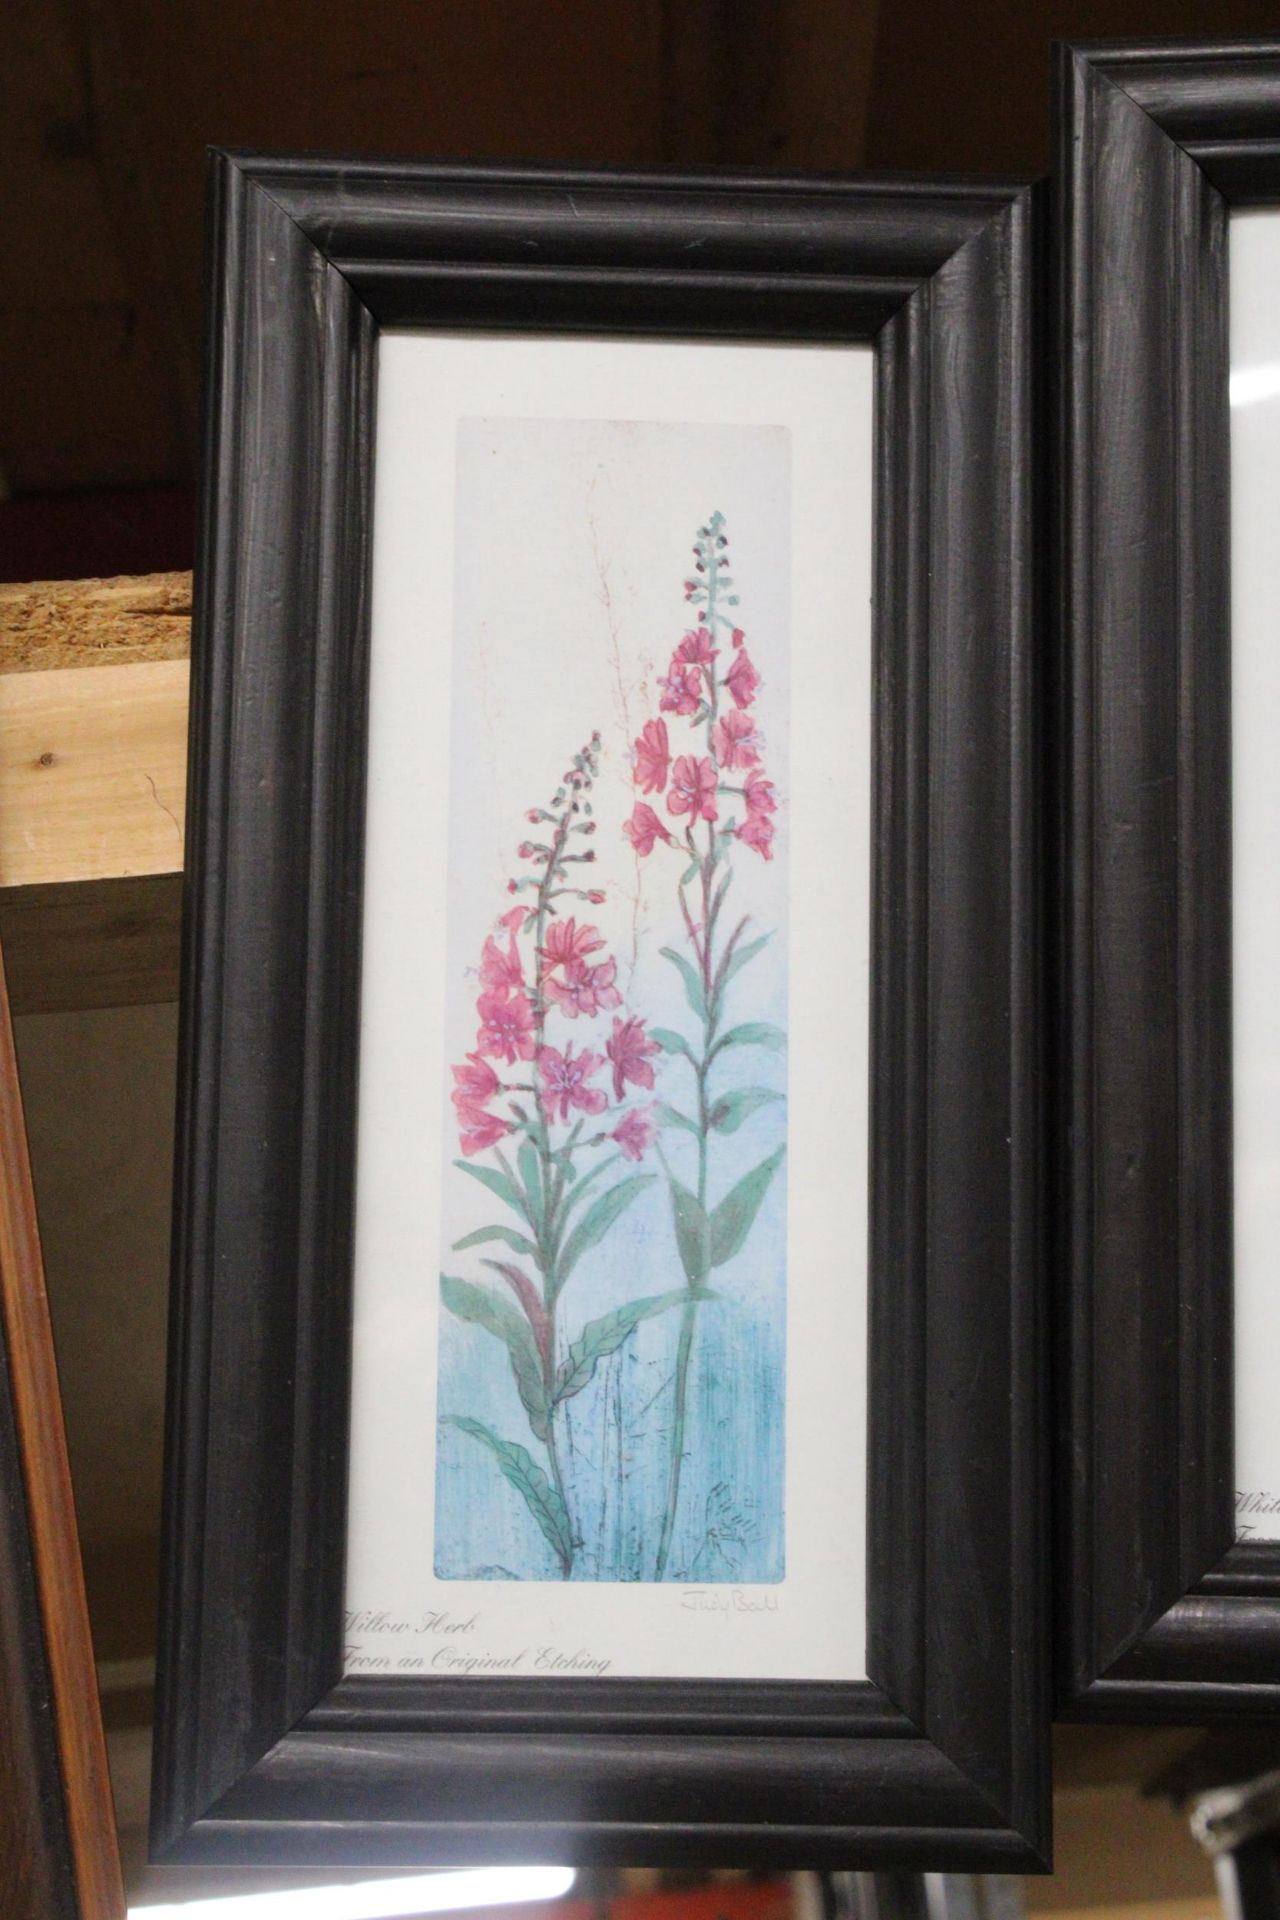 A PAIR OF SMALL FLORAL PRINTS, SIGNED JUDY BALL - Image 2 of 4